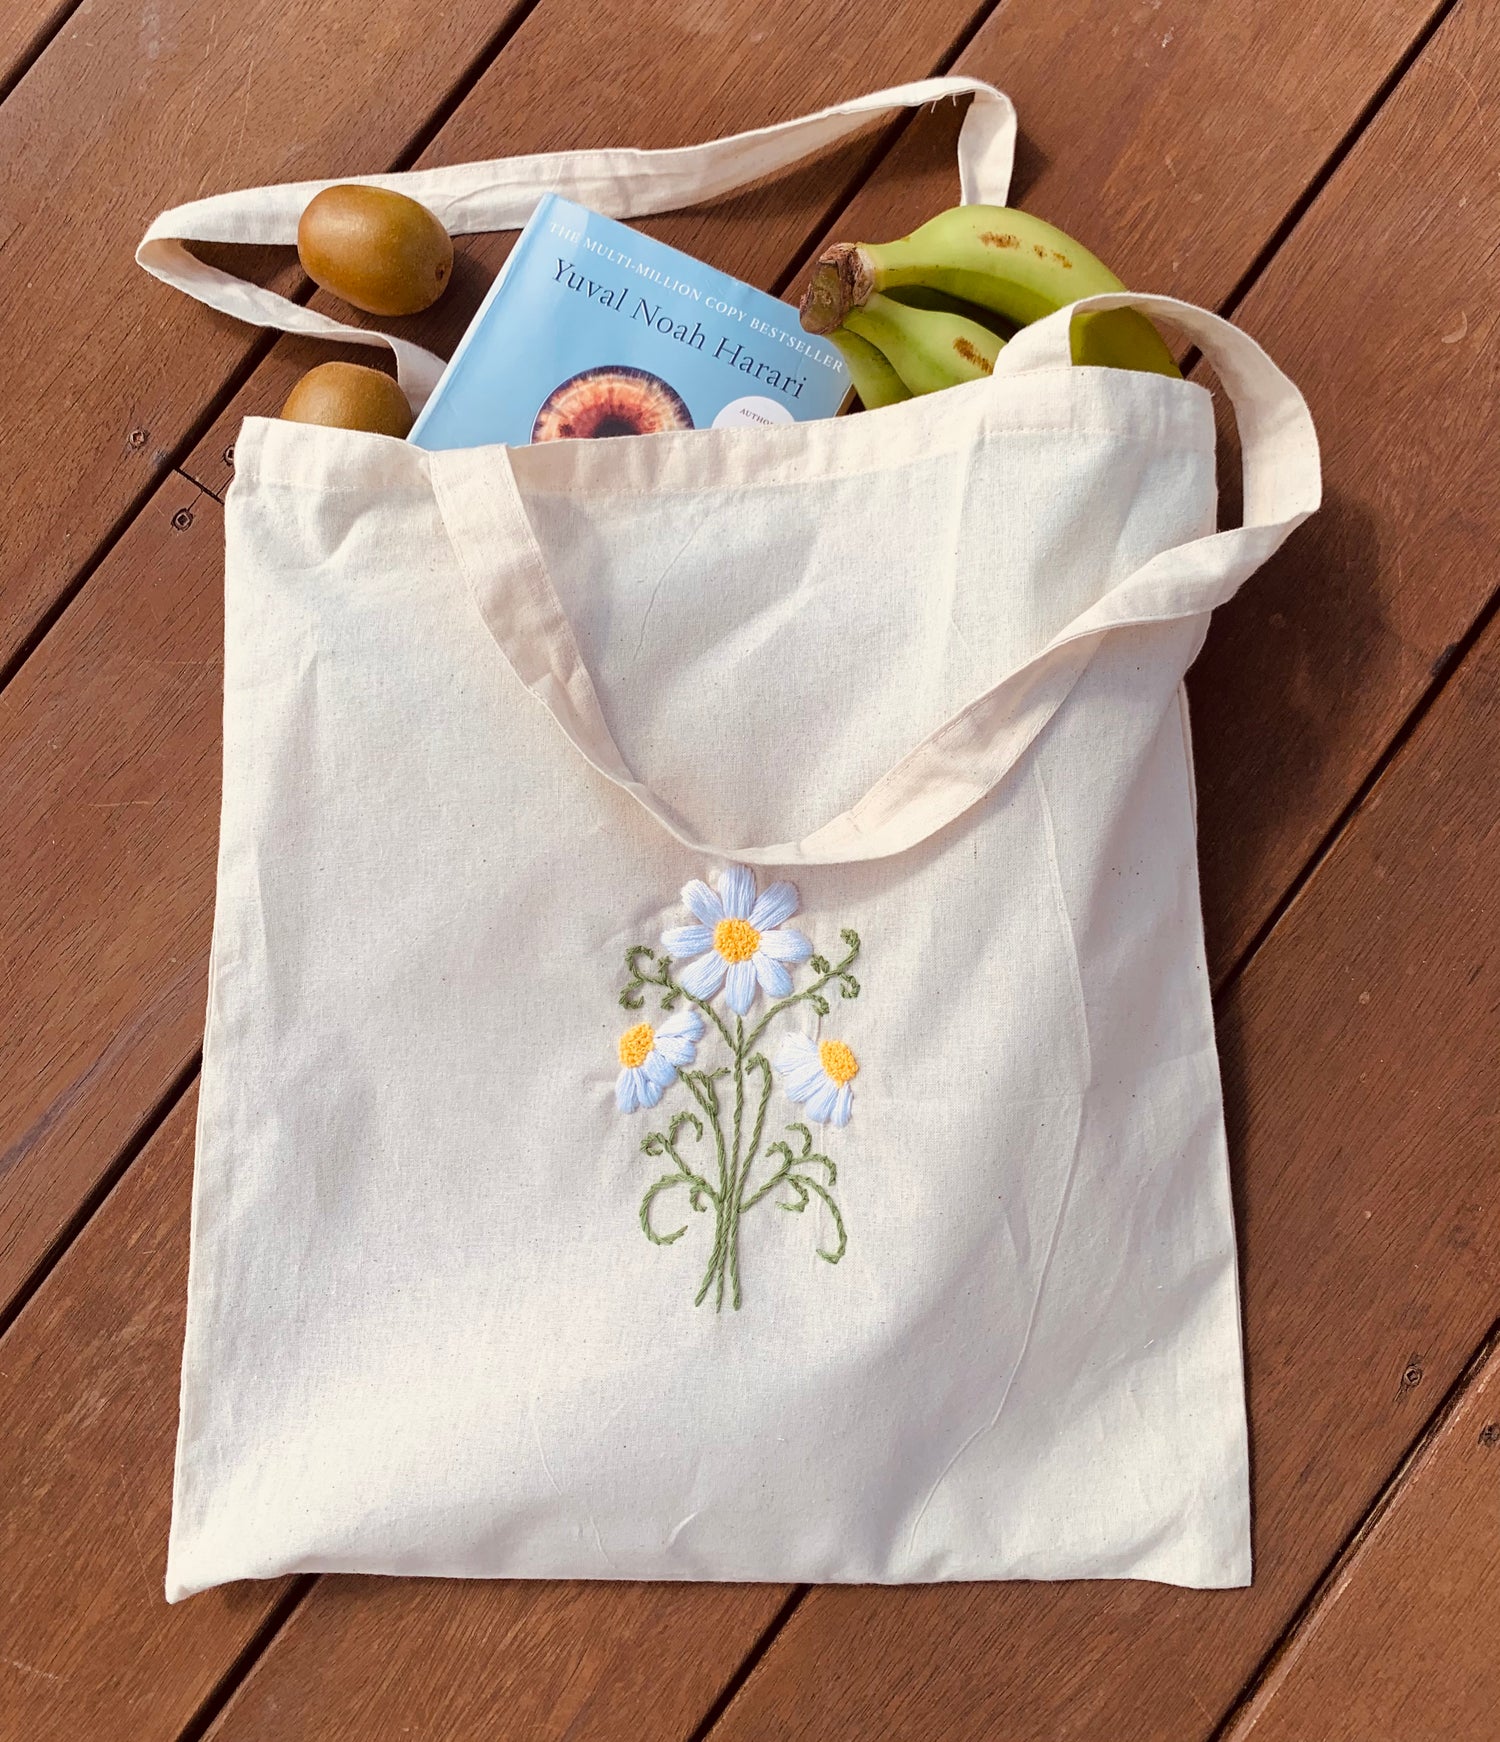 Make your own hand embroidered tote bag - MakeKit DIY Craft Kits